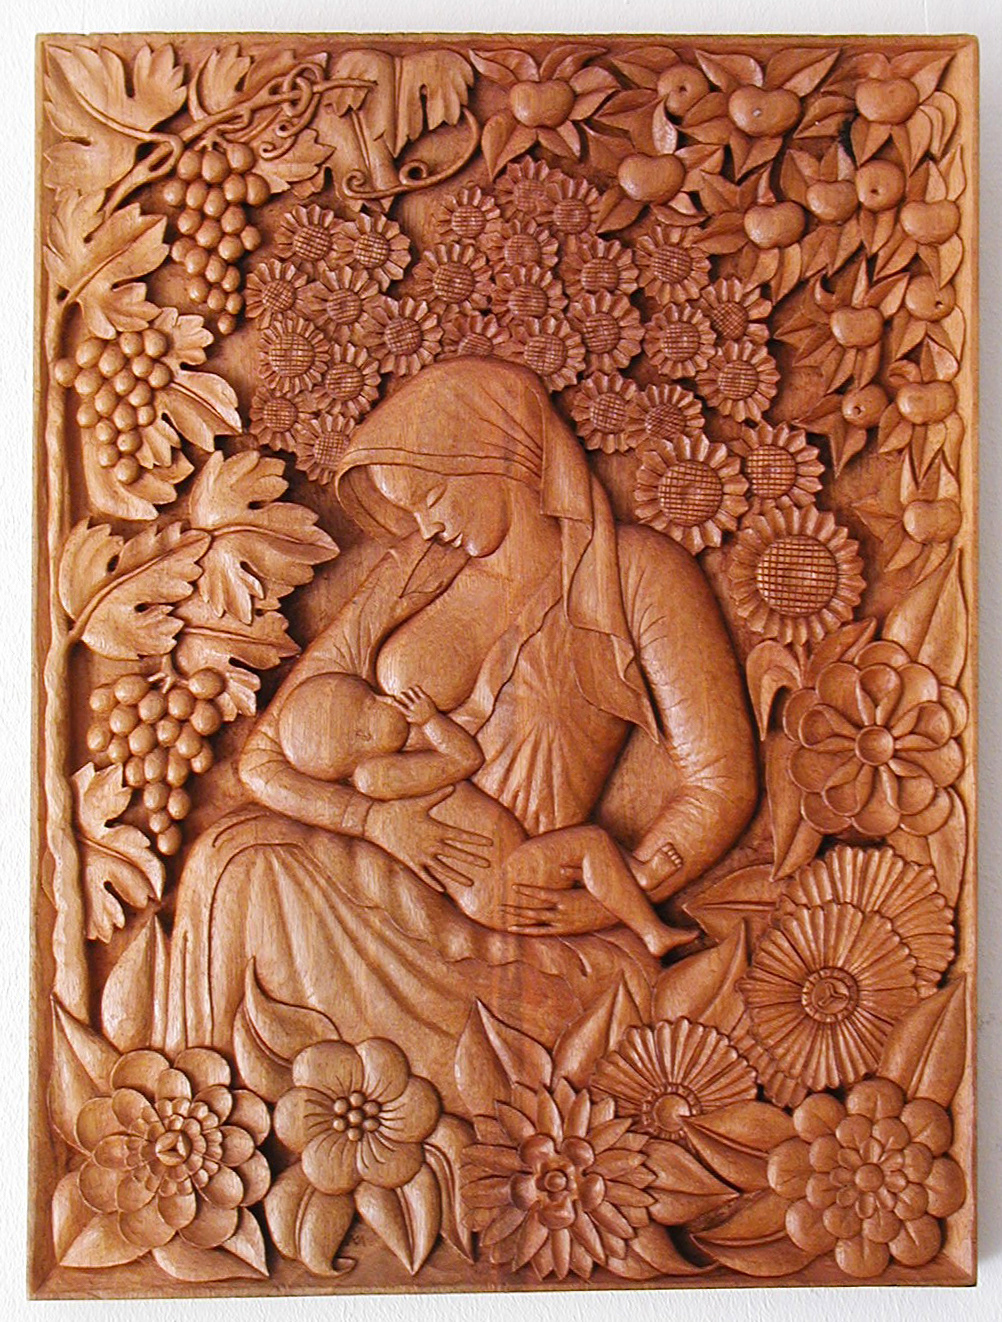 wall hanging Wood wall art Art Wood Carvings  Hand Carved wood carvings home decor collectable art wood carving designs  hand made woodworking